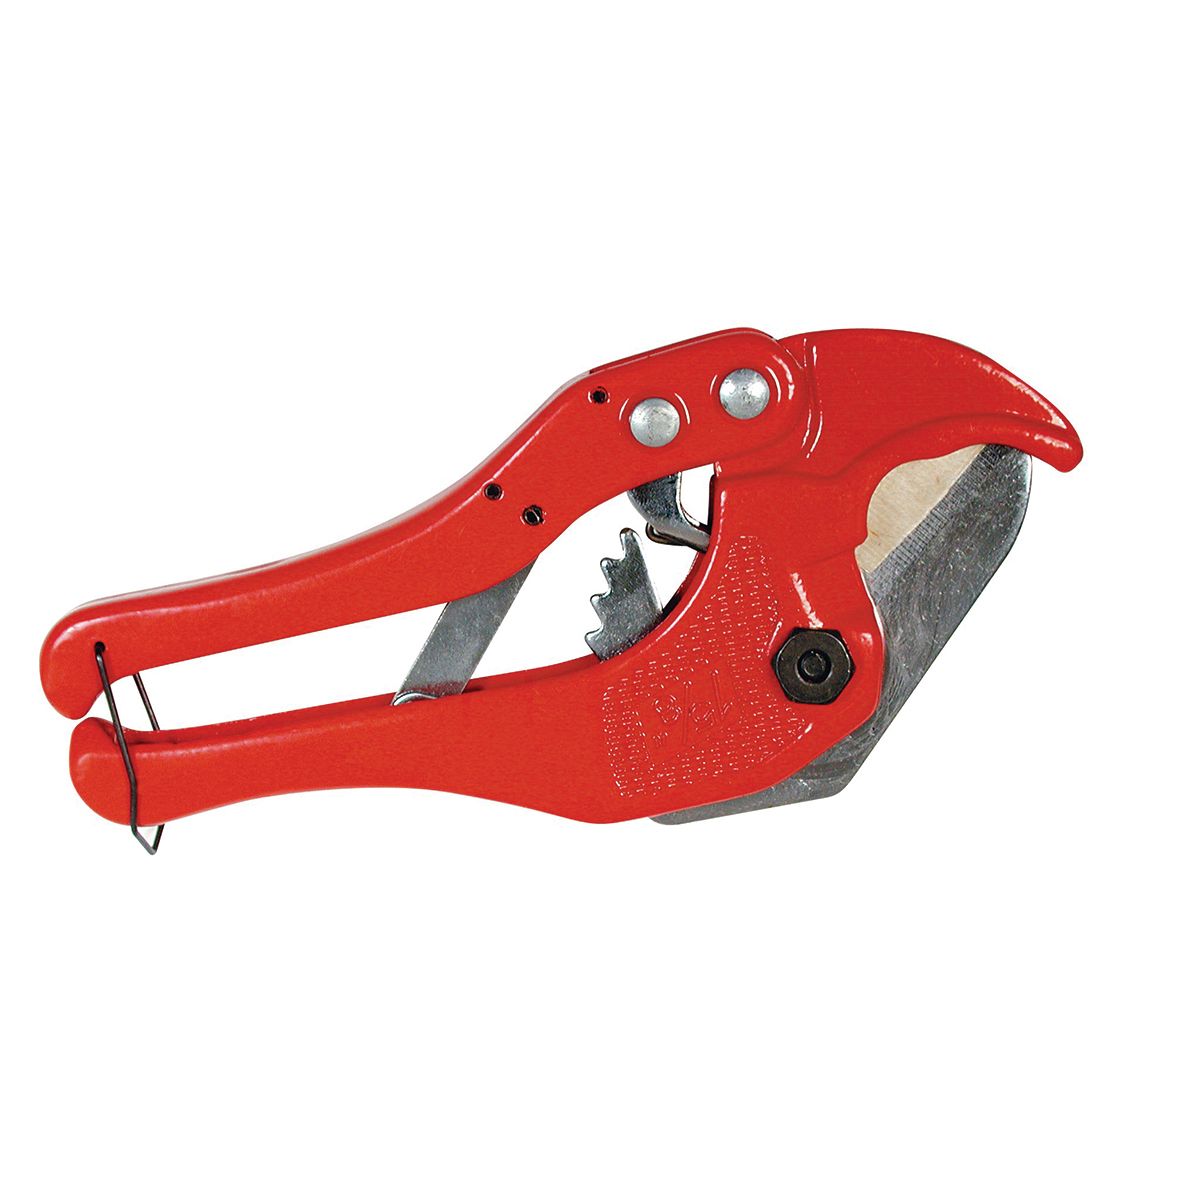 Pipe cutter 63mm - Online Hardware Store in Nepal  Buy Construction & Building  Materials - Hamro Nirman